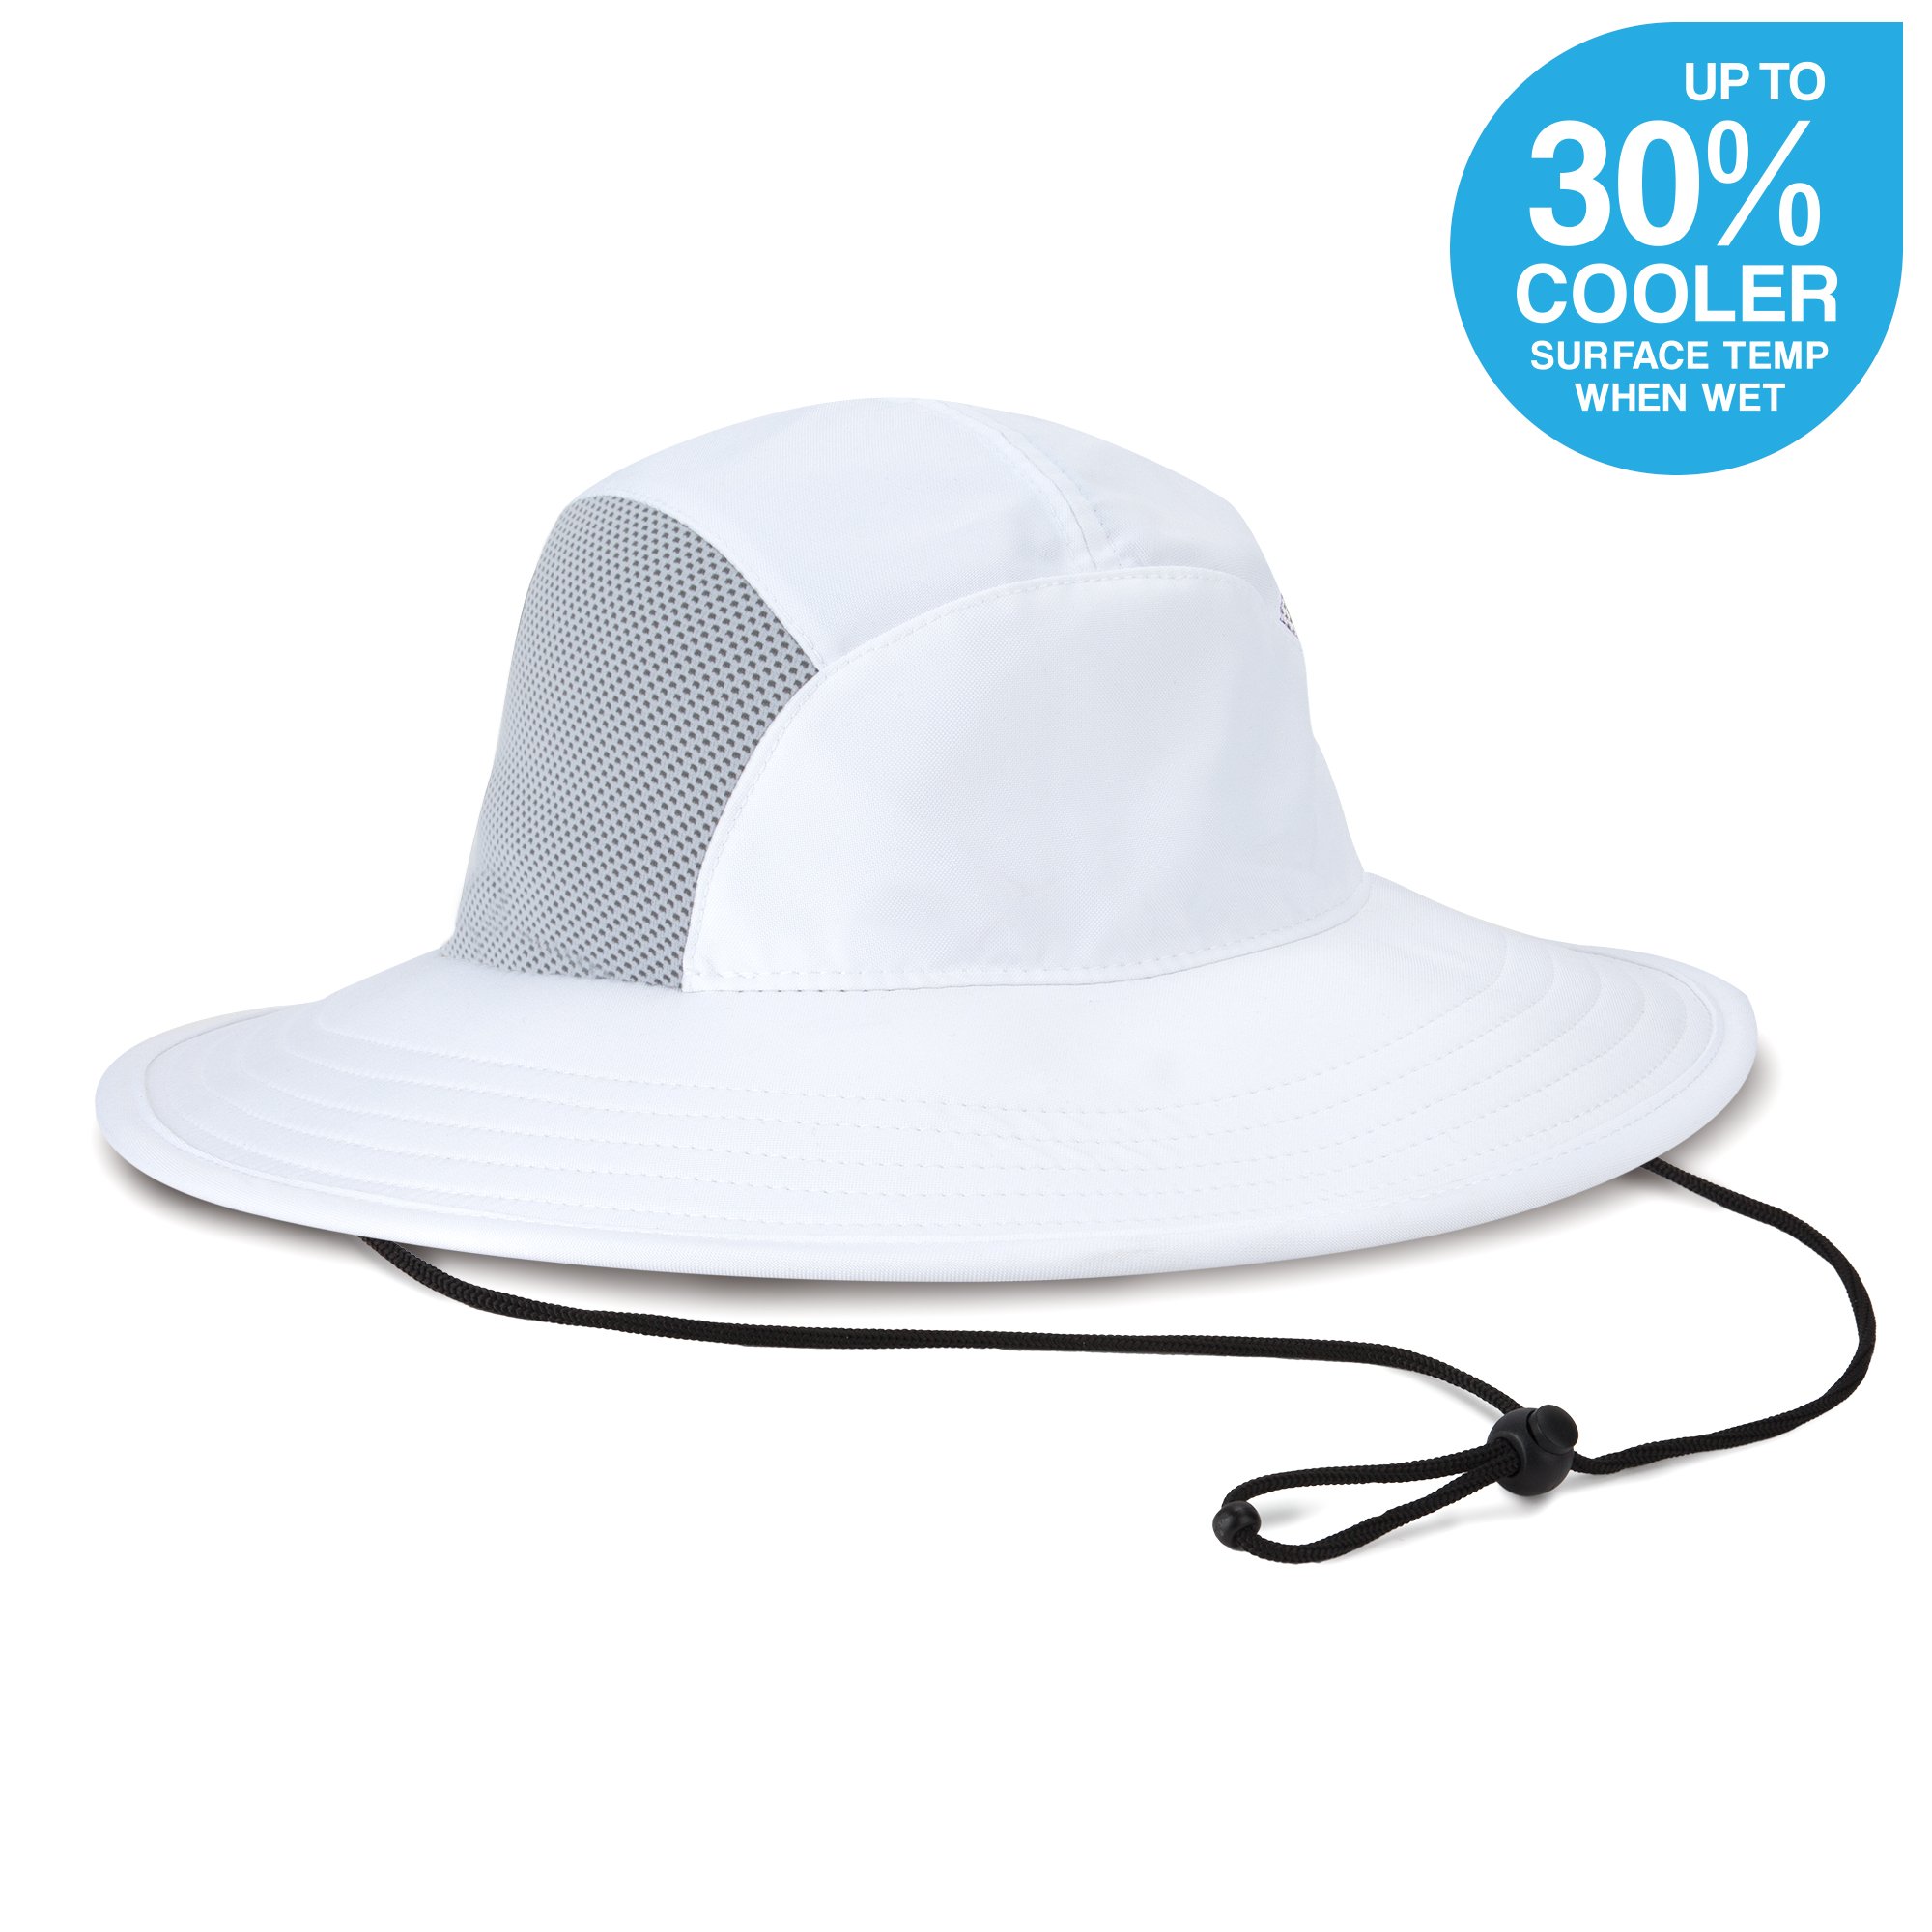 Men's and Women's Imperial Sun Protection Cooling Floppy Hat